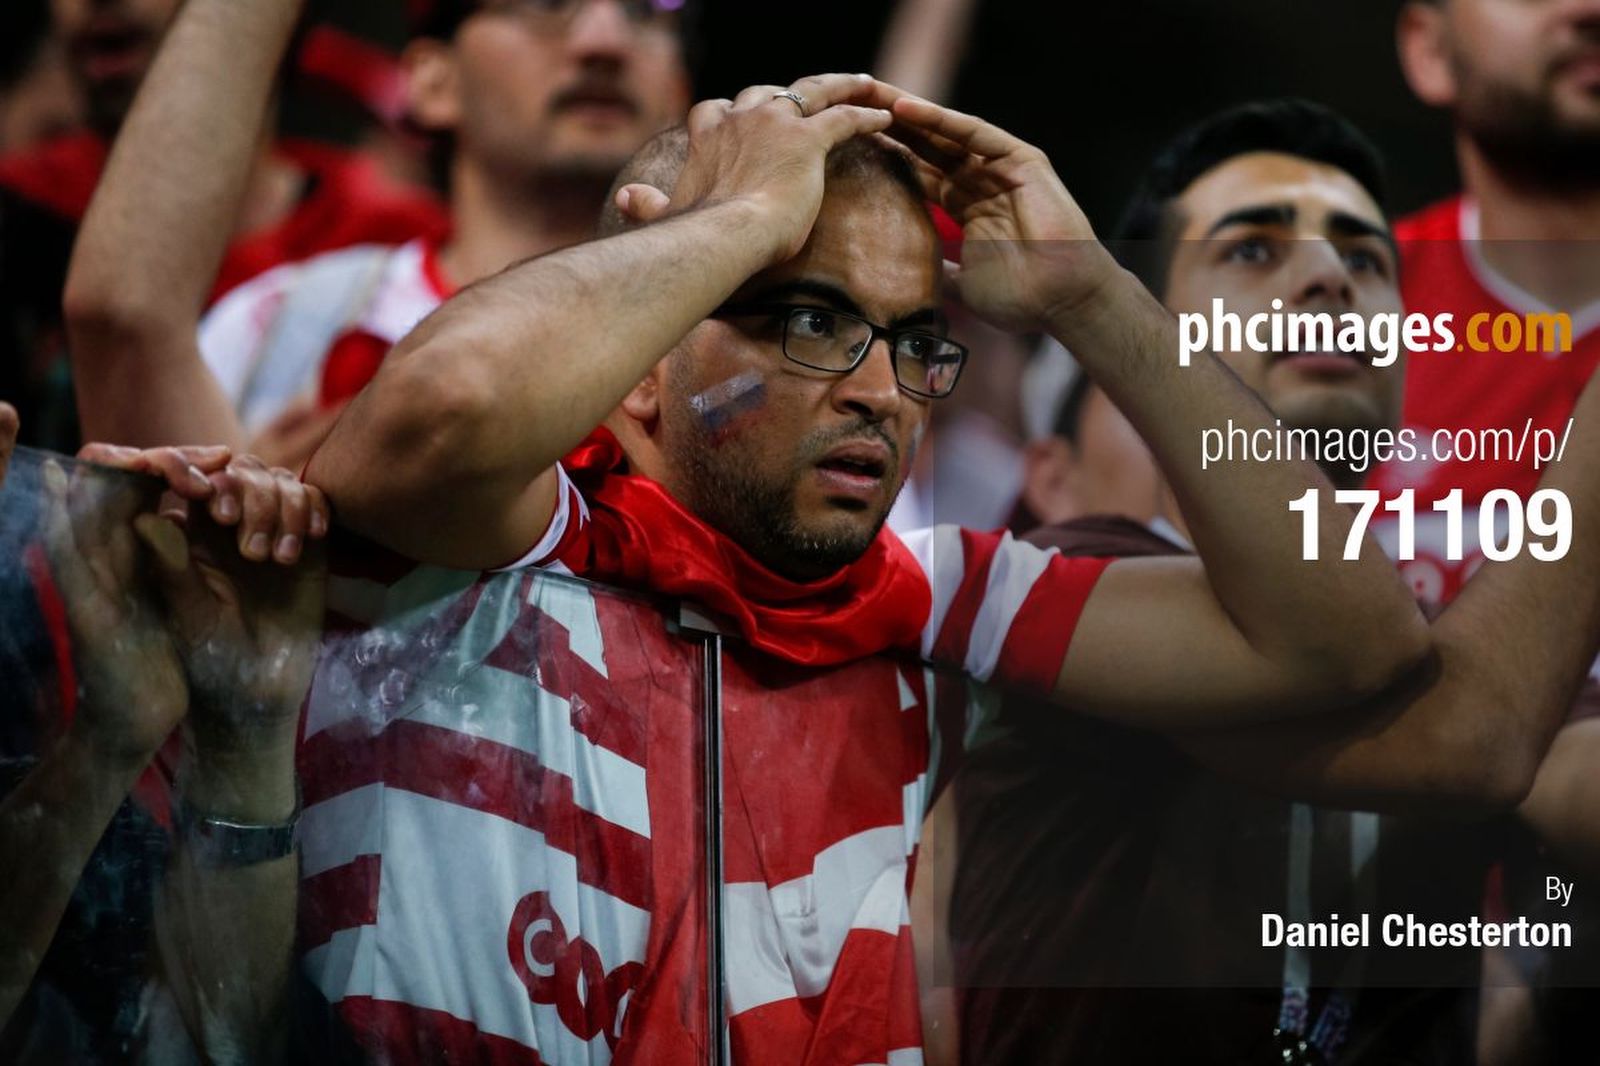 A Tunisia fan can’t take any more